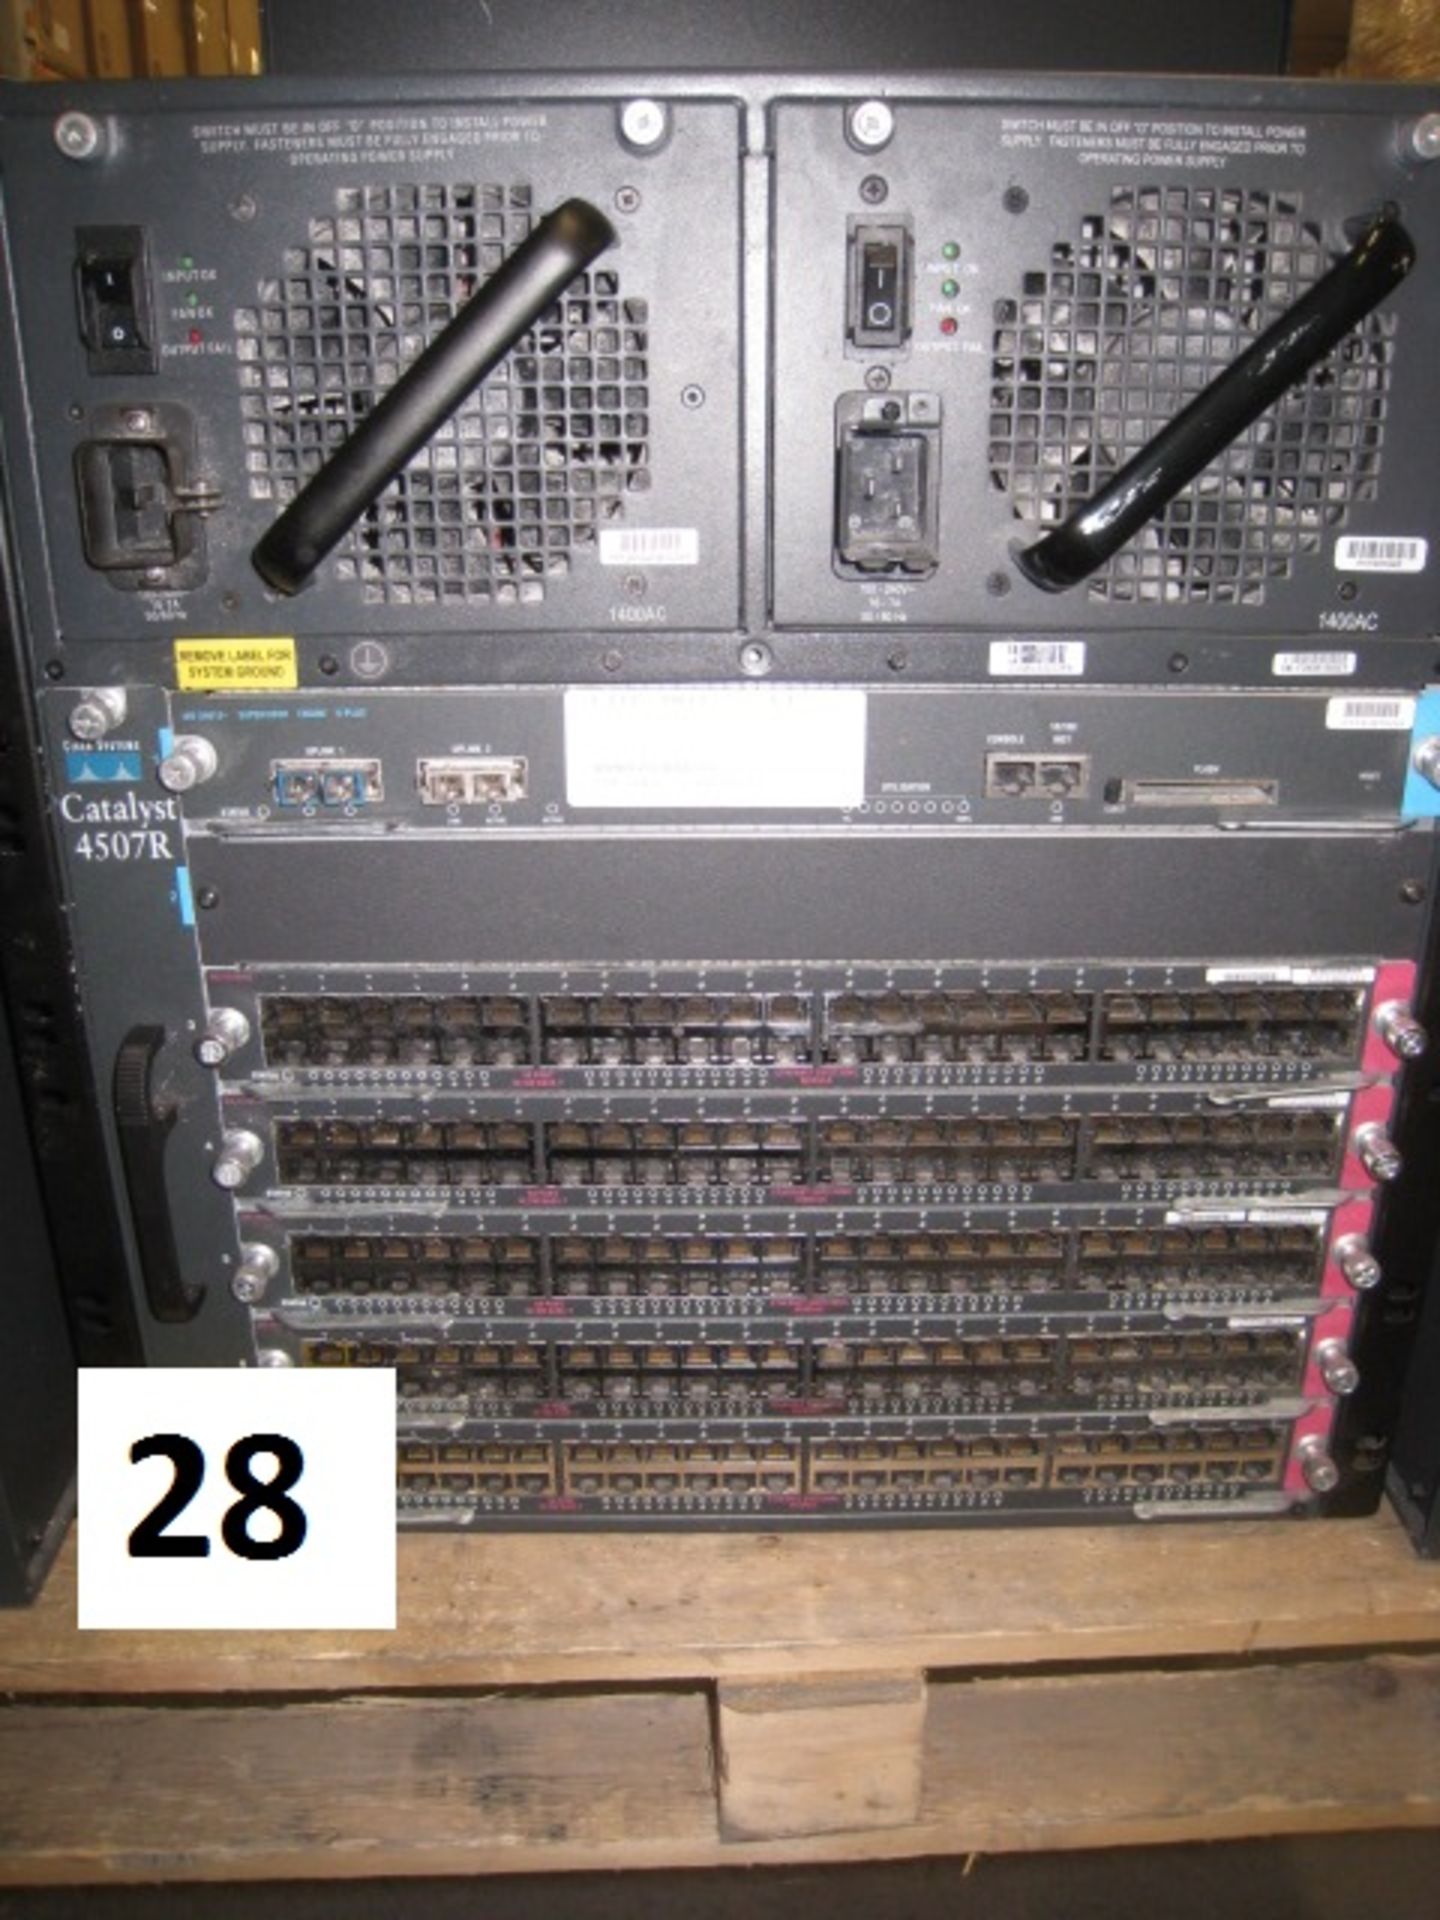 Cisco Catalyst 4507R chassis, with  1 X WS-X4013+ Supervisor engine, 5 X WS-X4148RJ 48 PORT switches